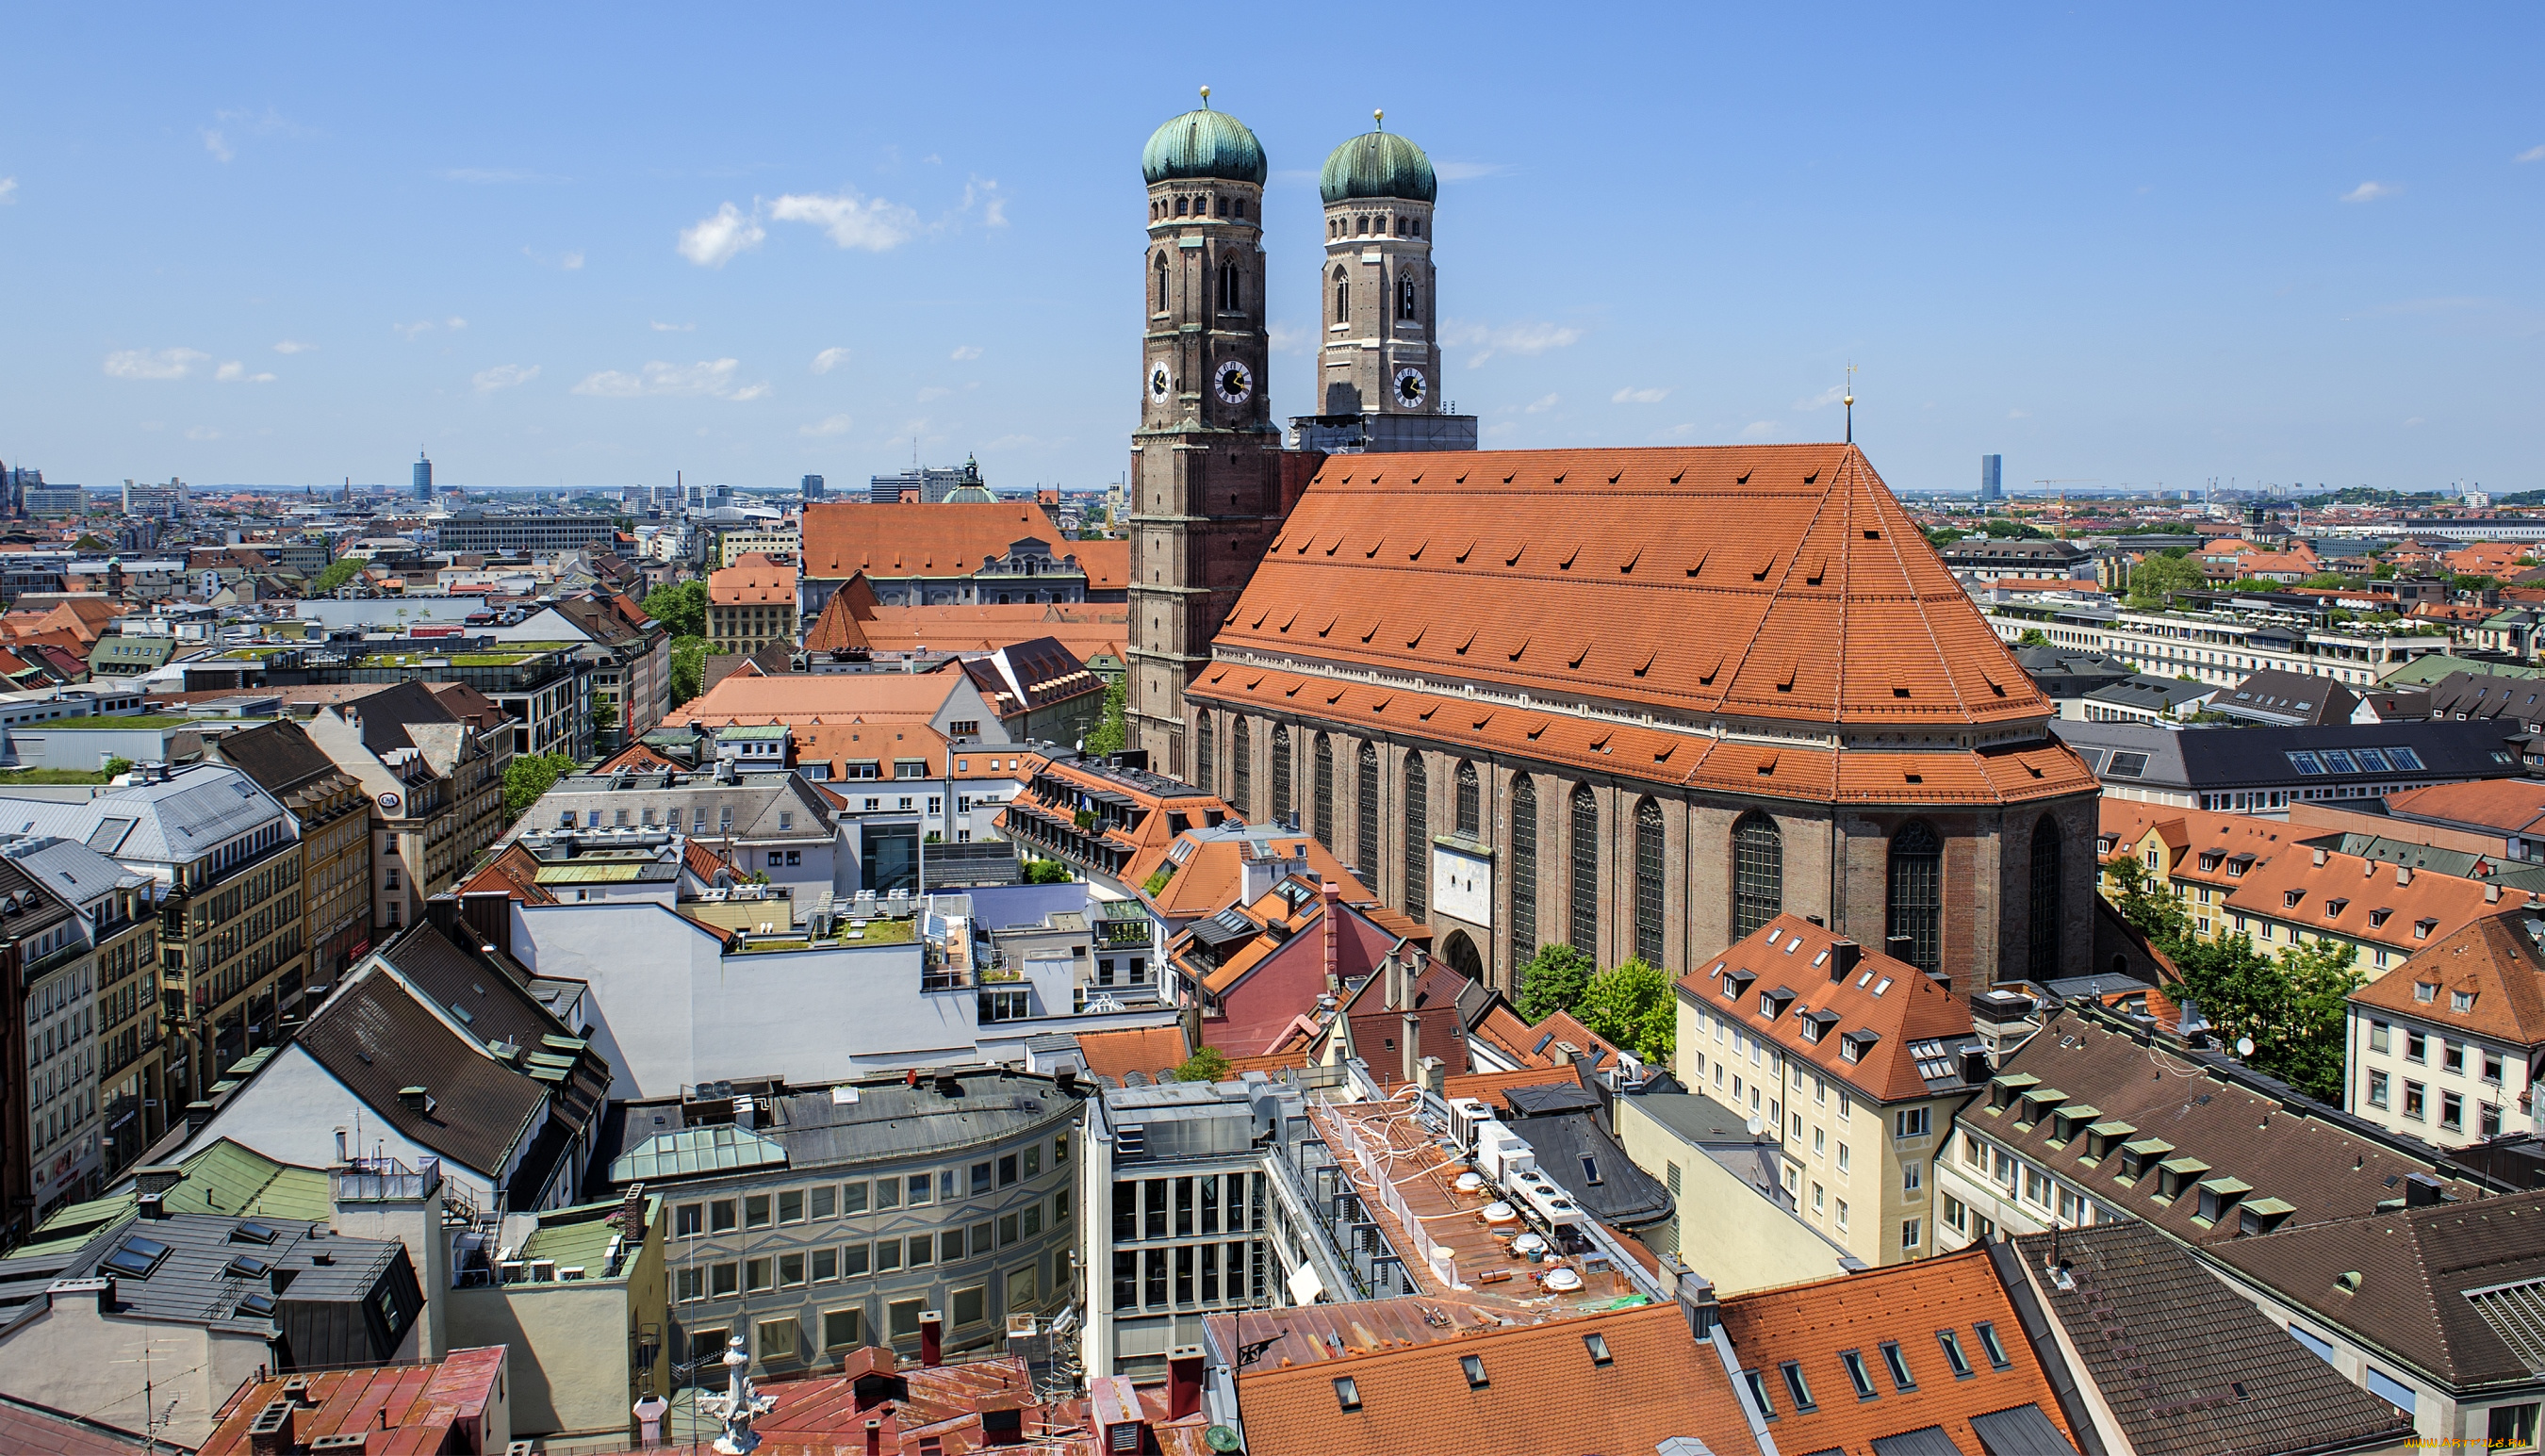 Heiliggeistkirche and Old Town Hall, Munich, Germany без смс